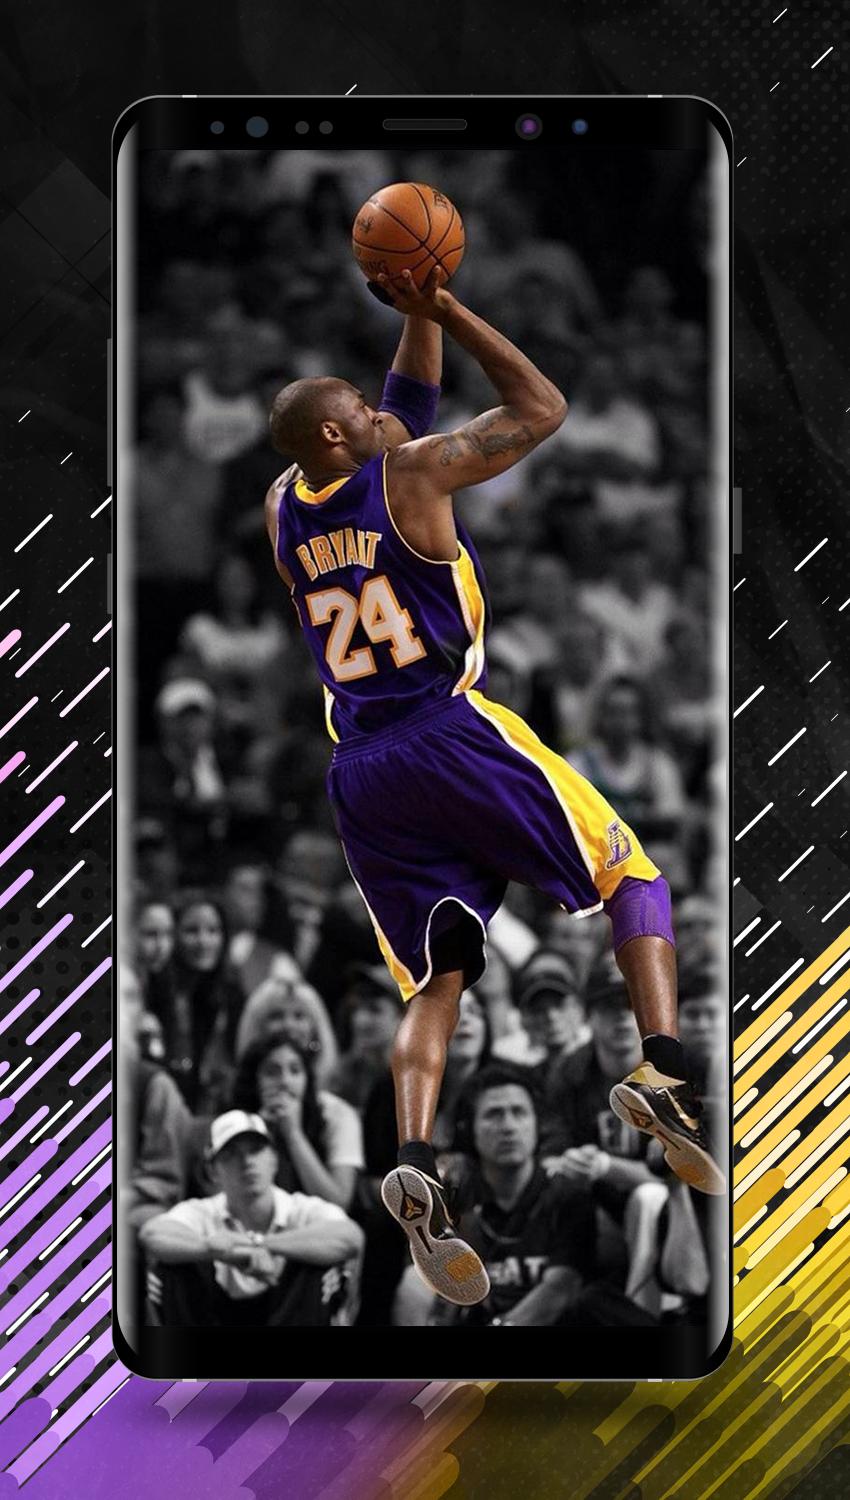 NBA Wallpaper for Android - APK Download